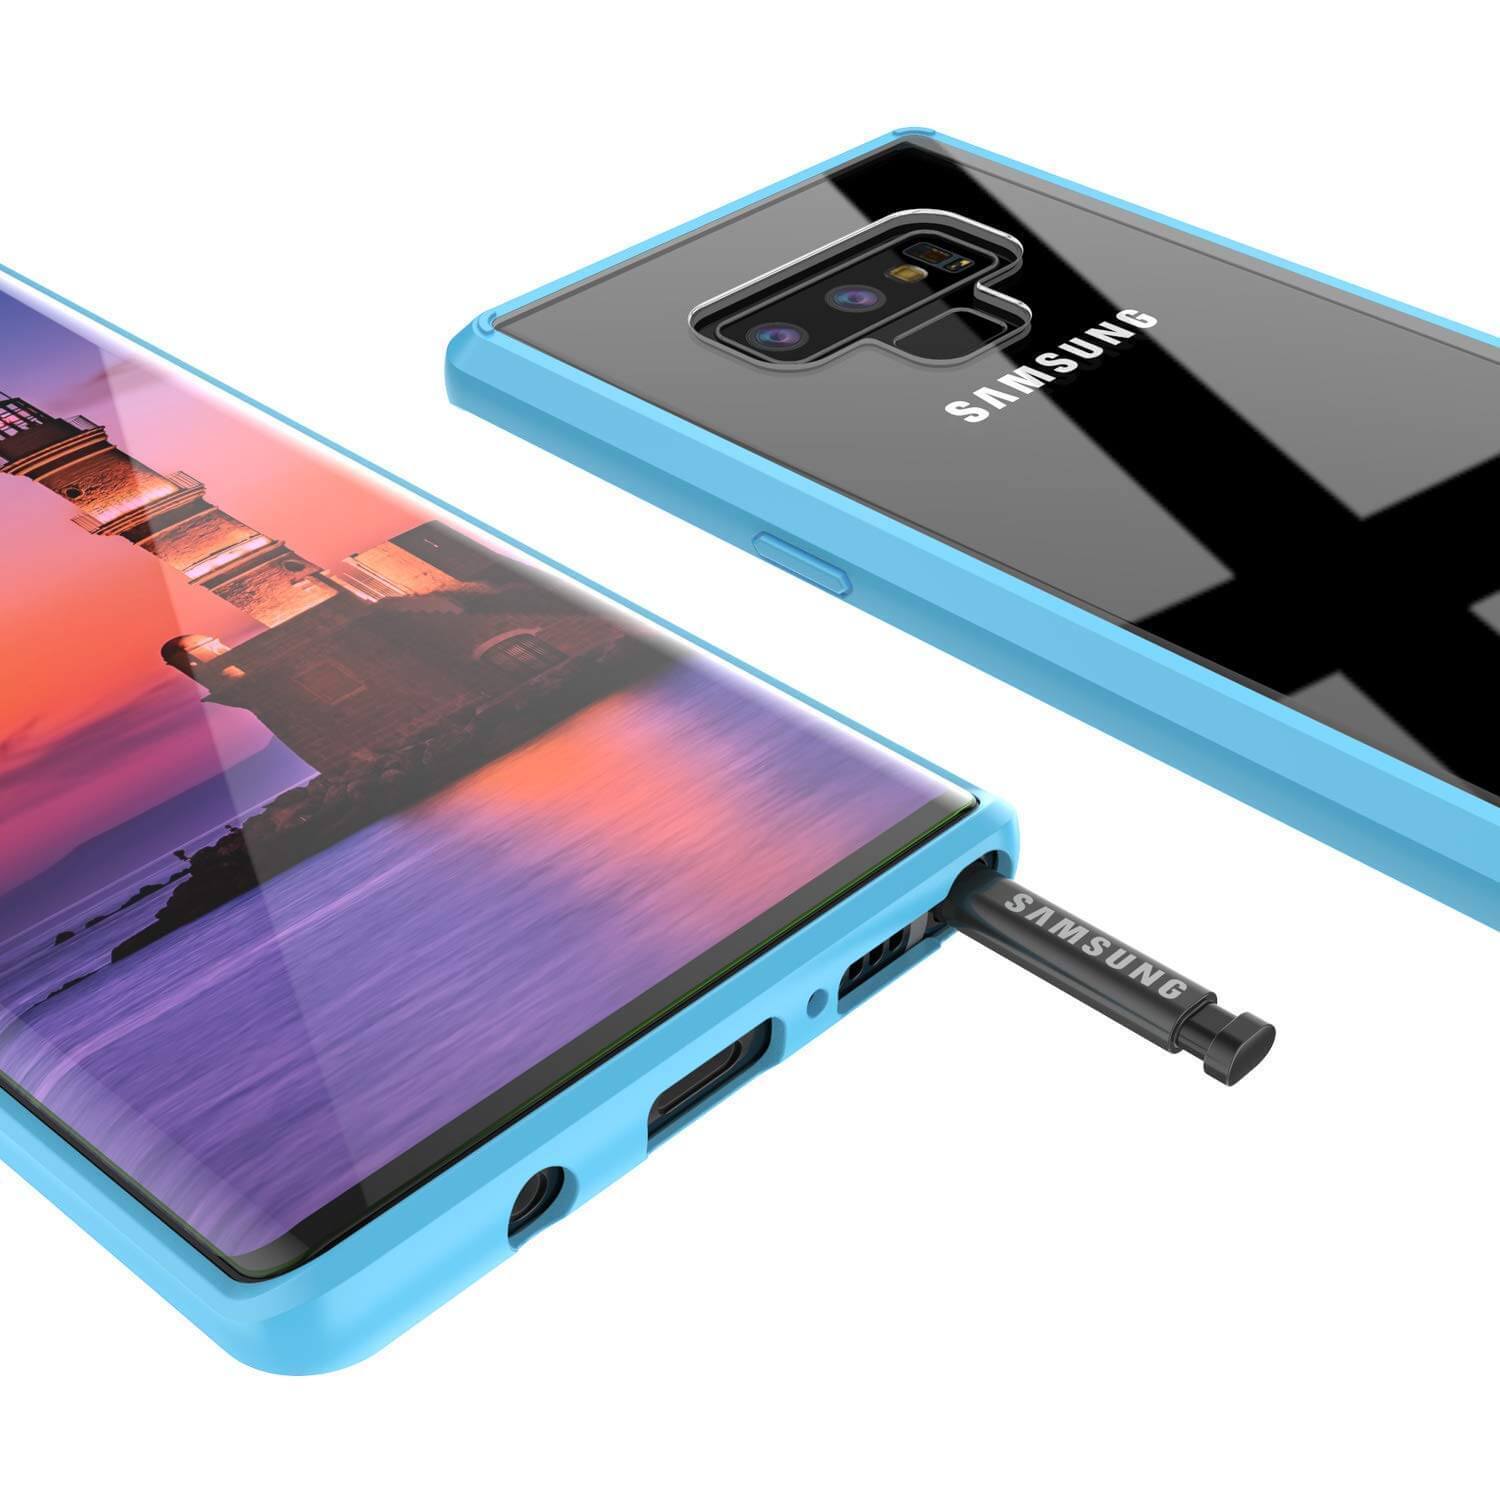 Galaxy Note 10+ Plus Punkcase Lucid-2.0 Series Slim Fit Armor Light Blue Case Cover